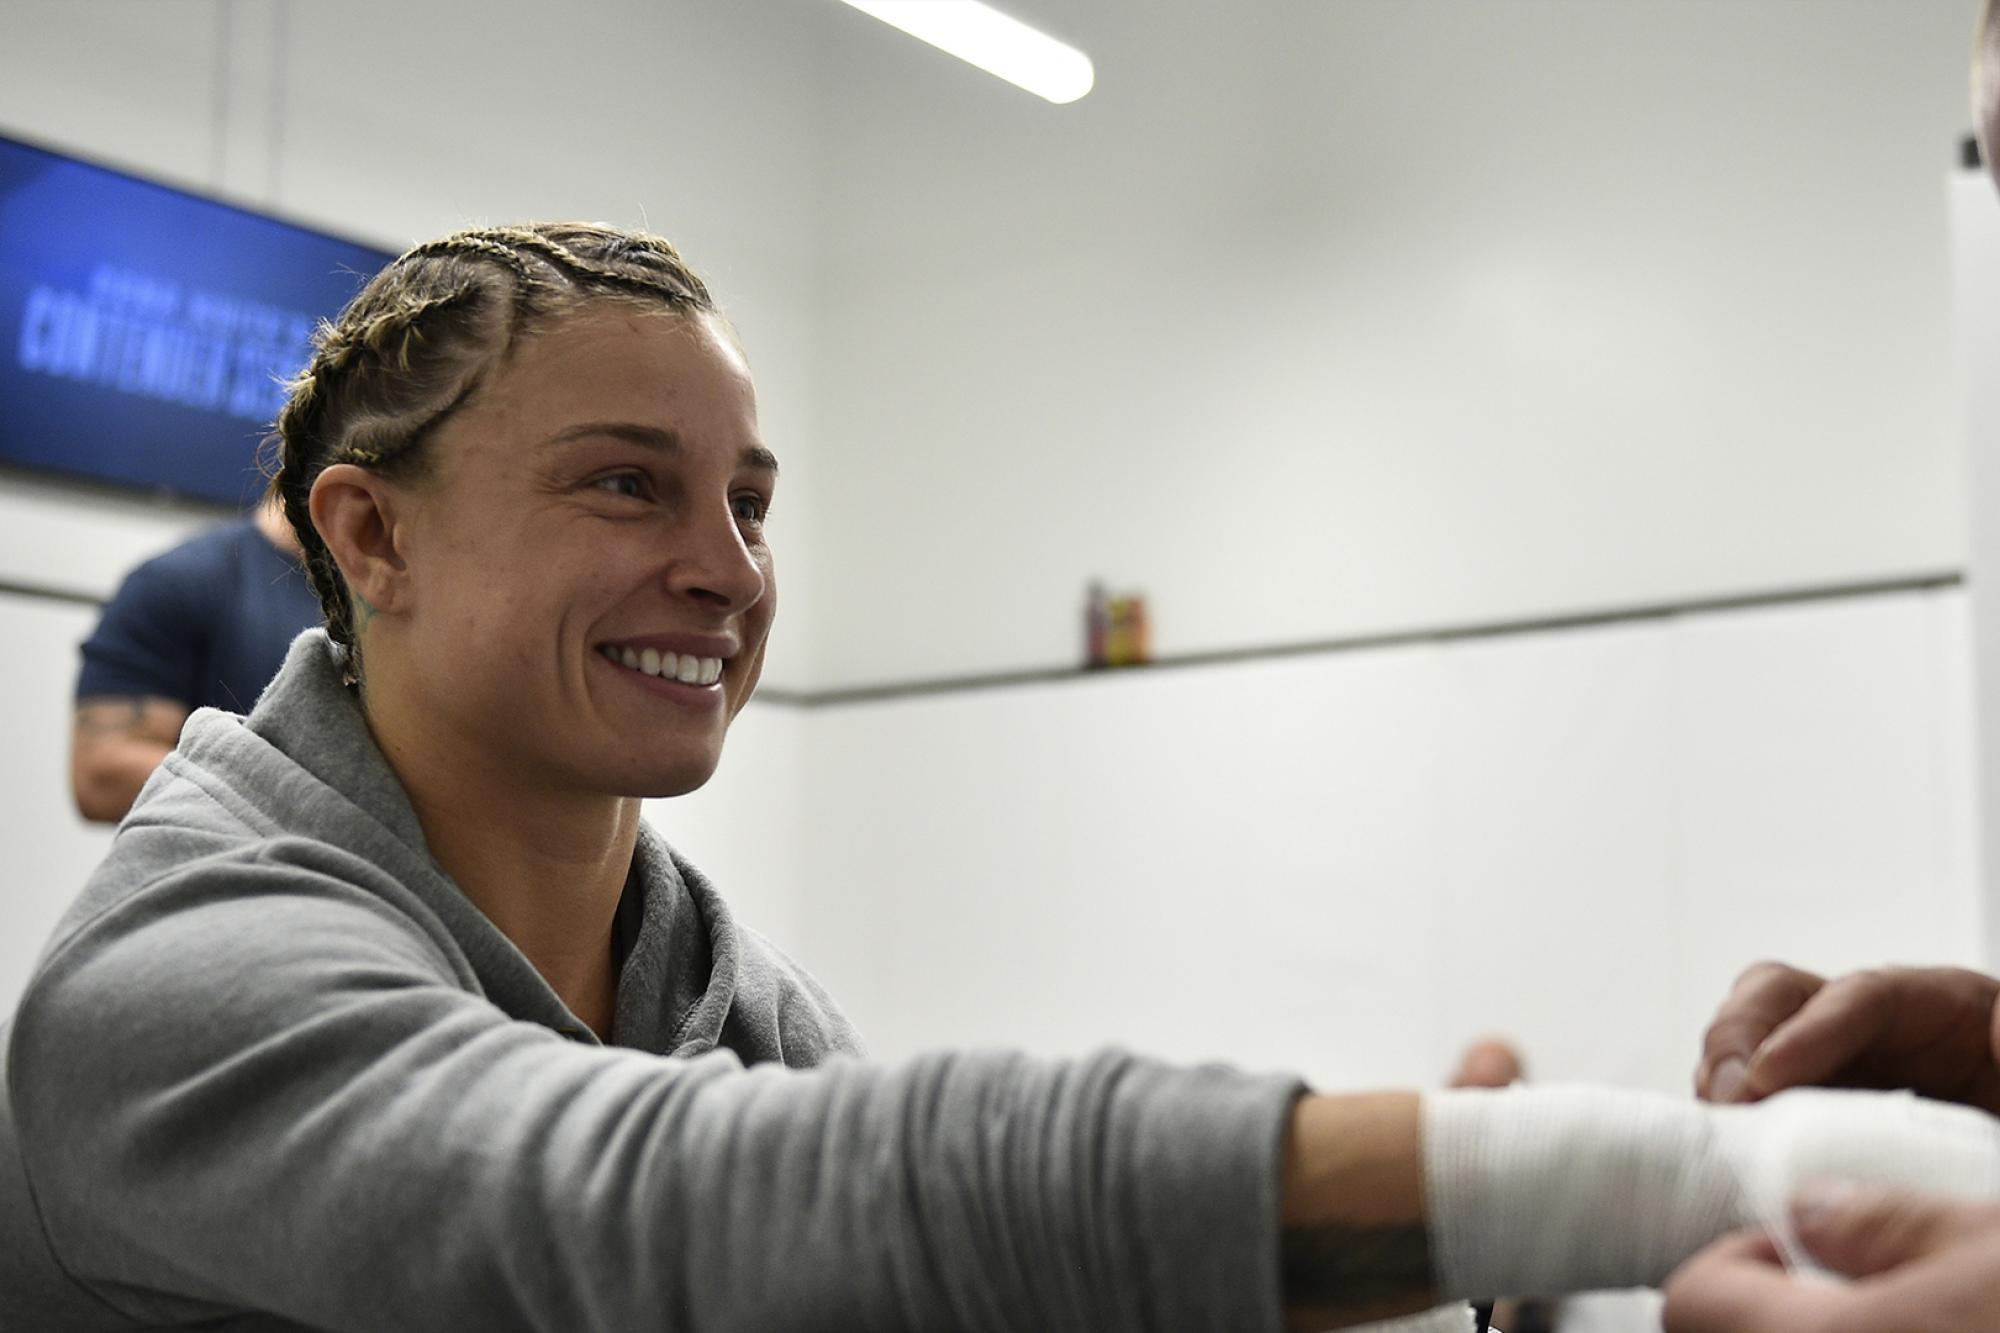 Hannah Goldy is one of the most bubbly characters in the UFC